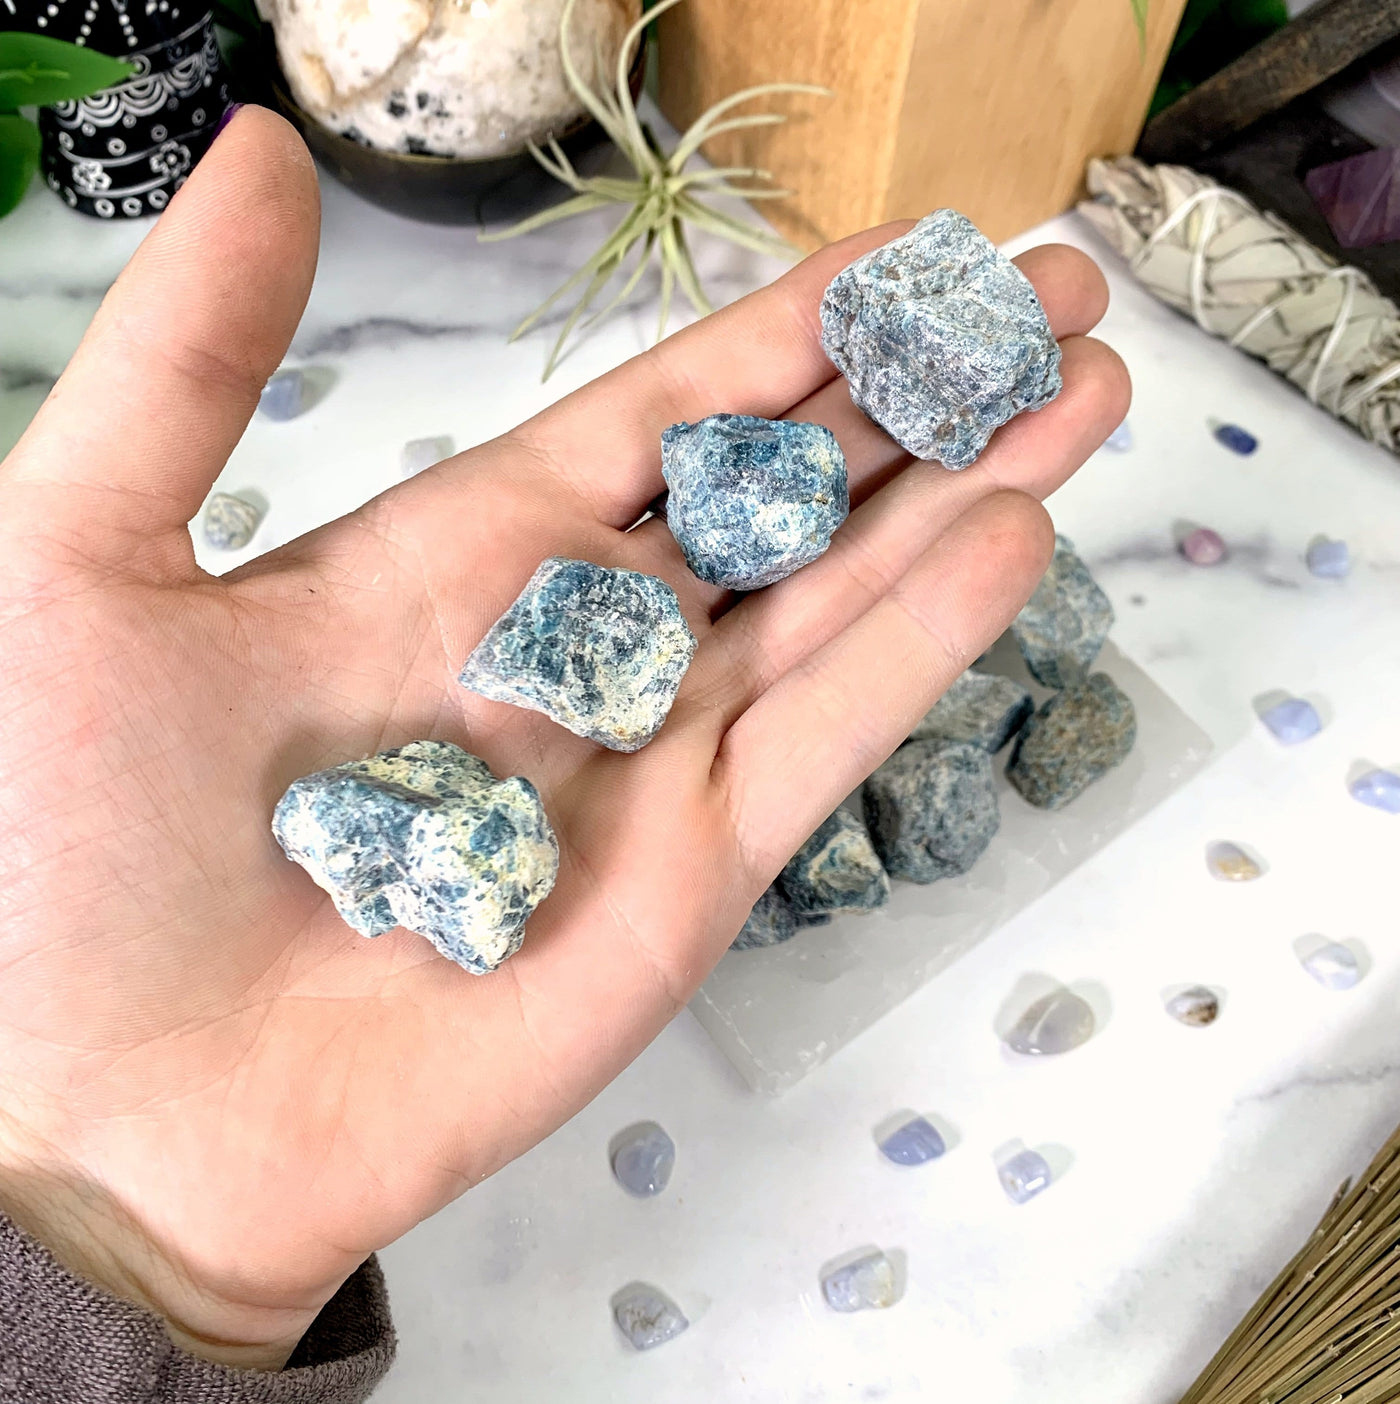 4 blue apatite stones in hand with white marble background